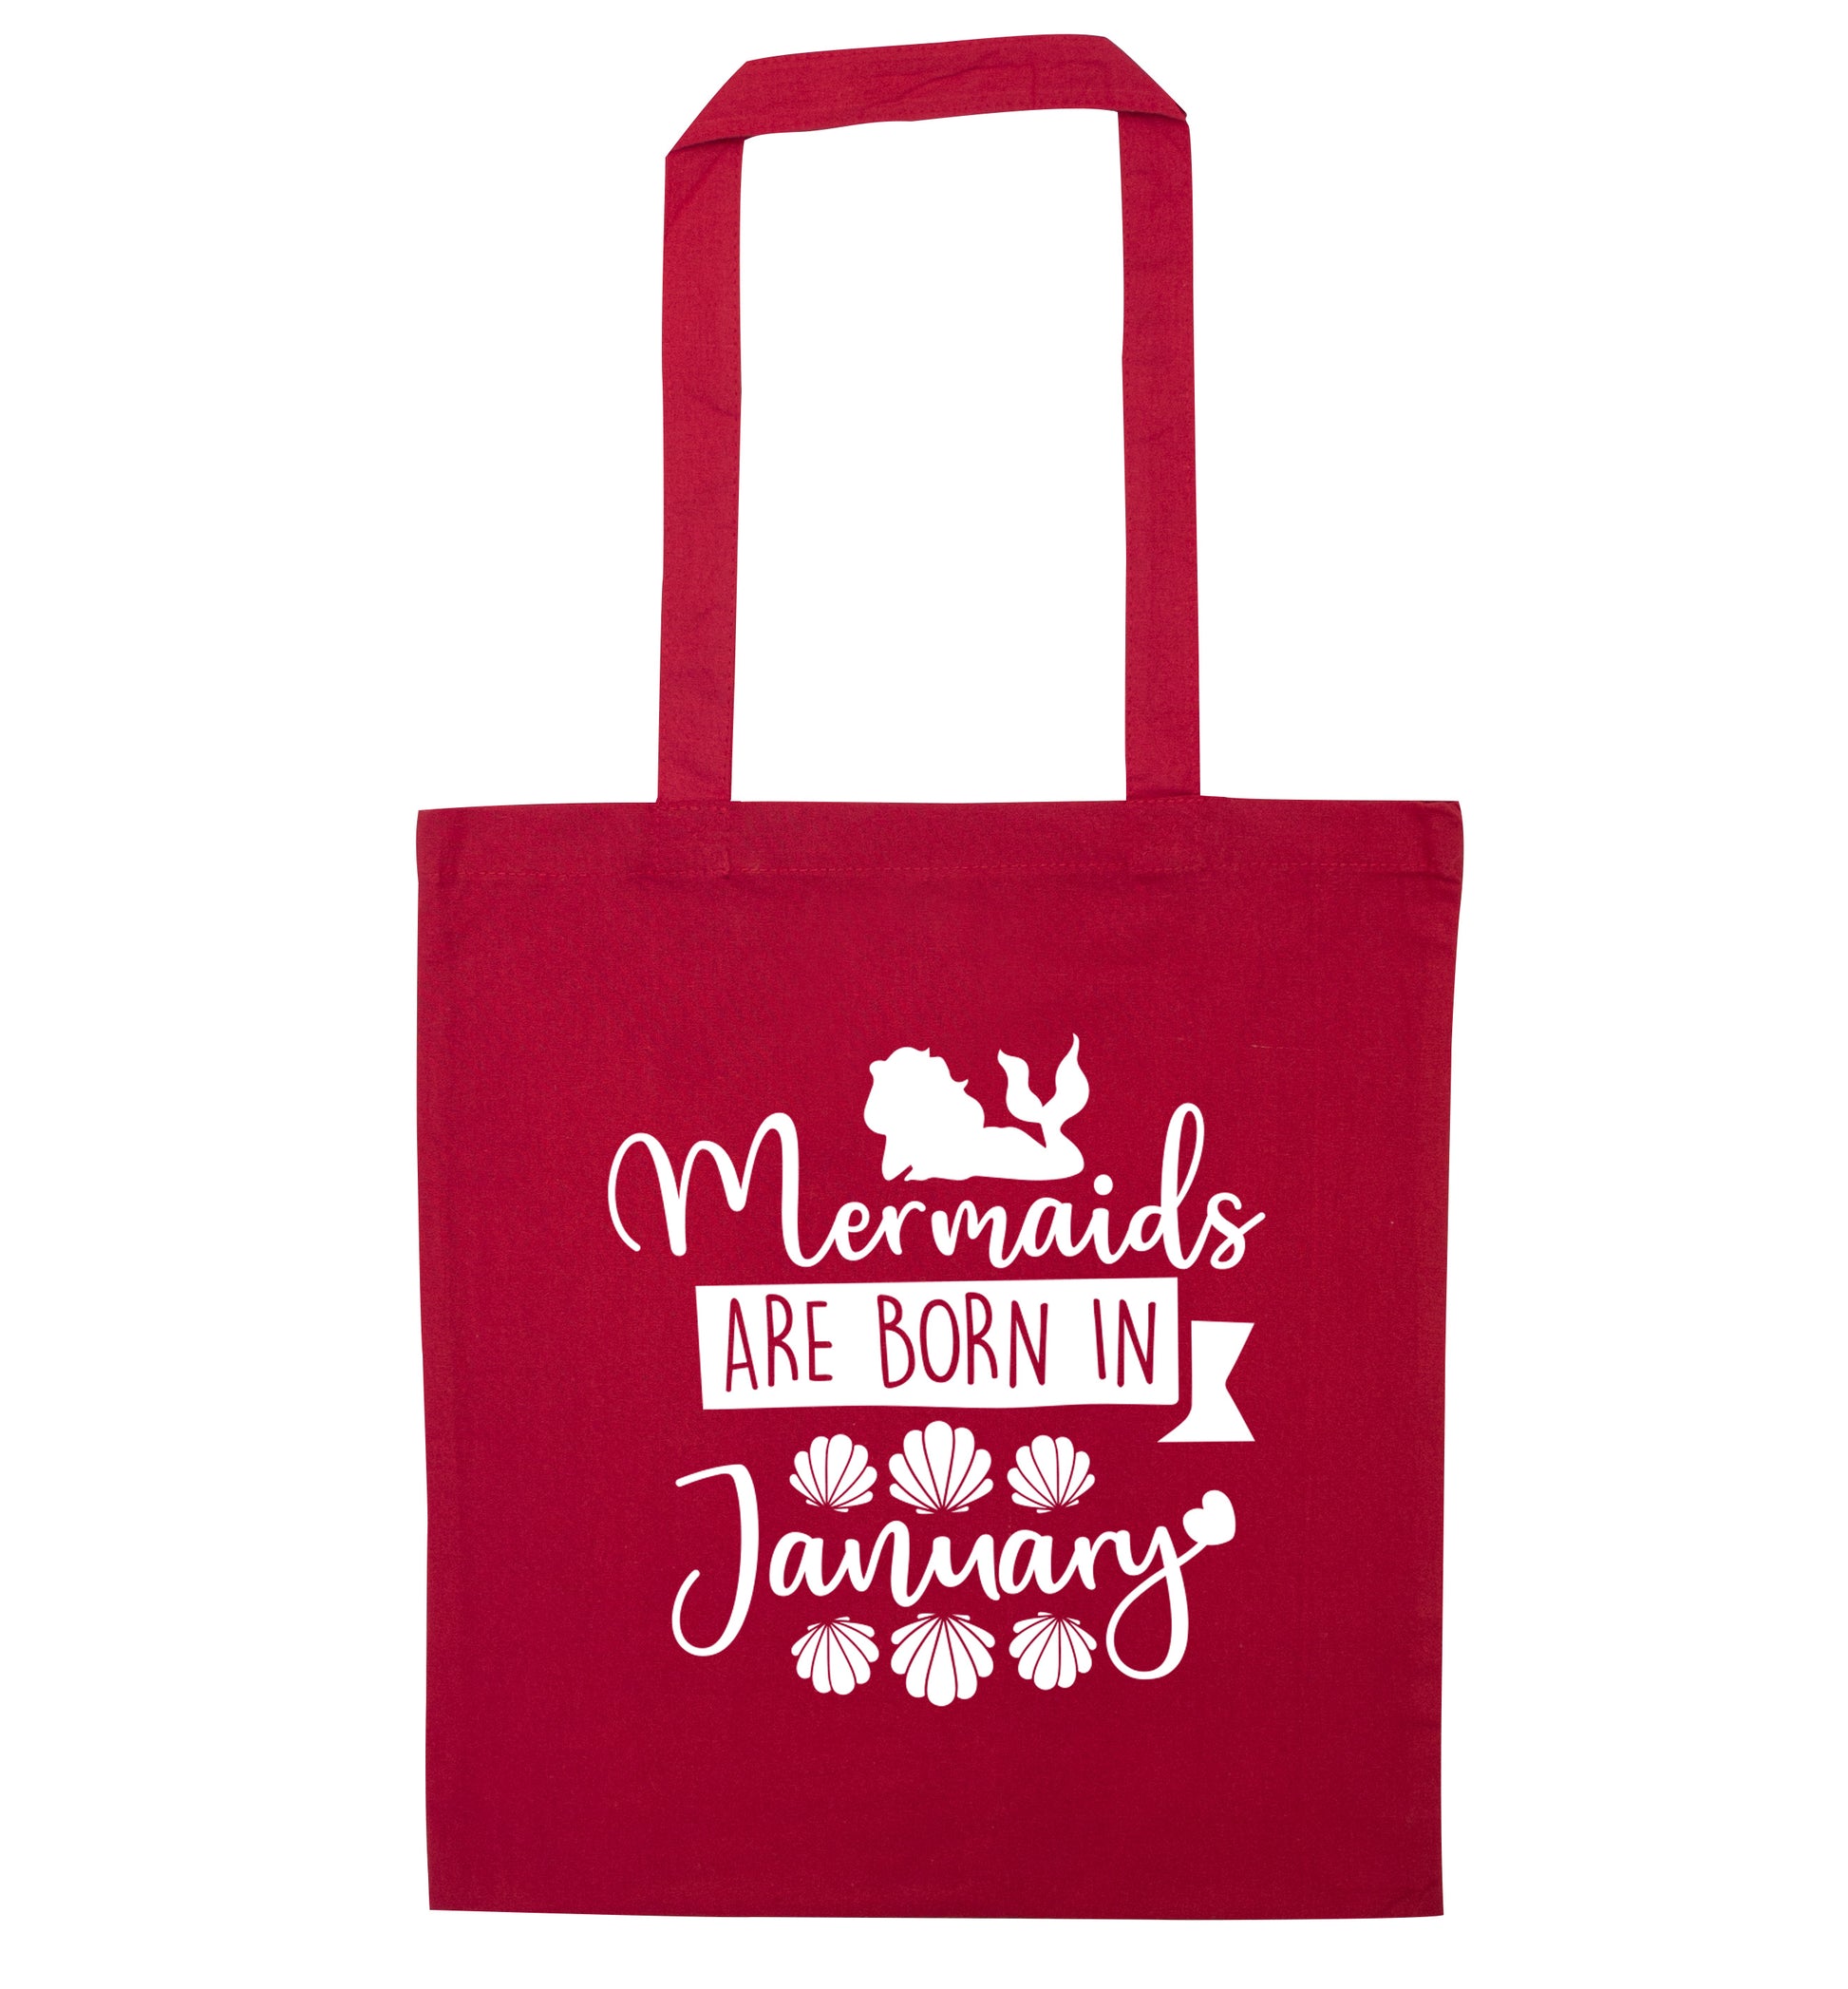 Mermaids are born in January red tote bag